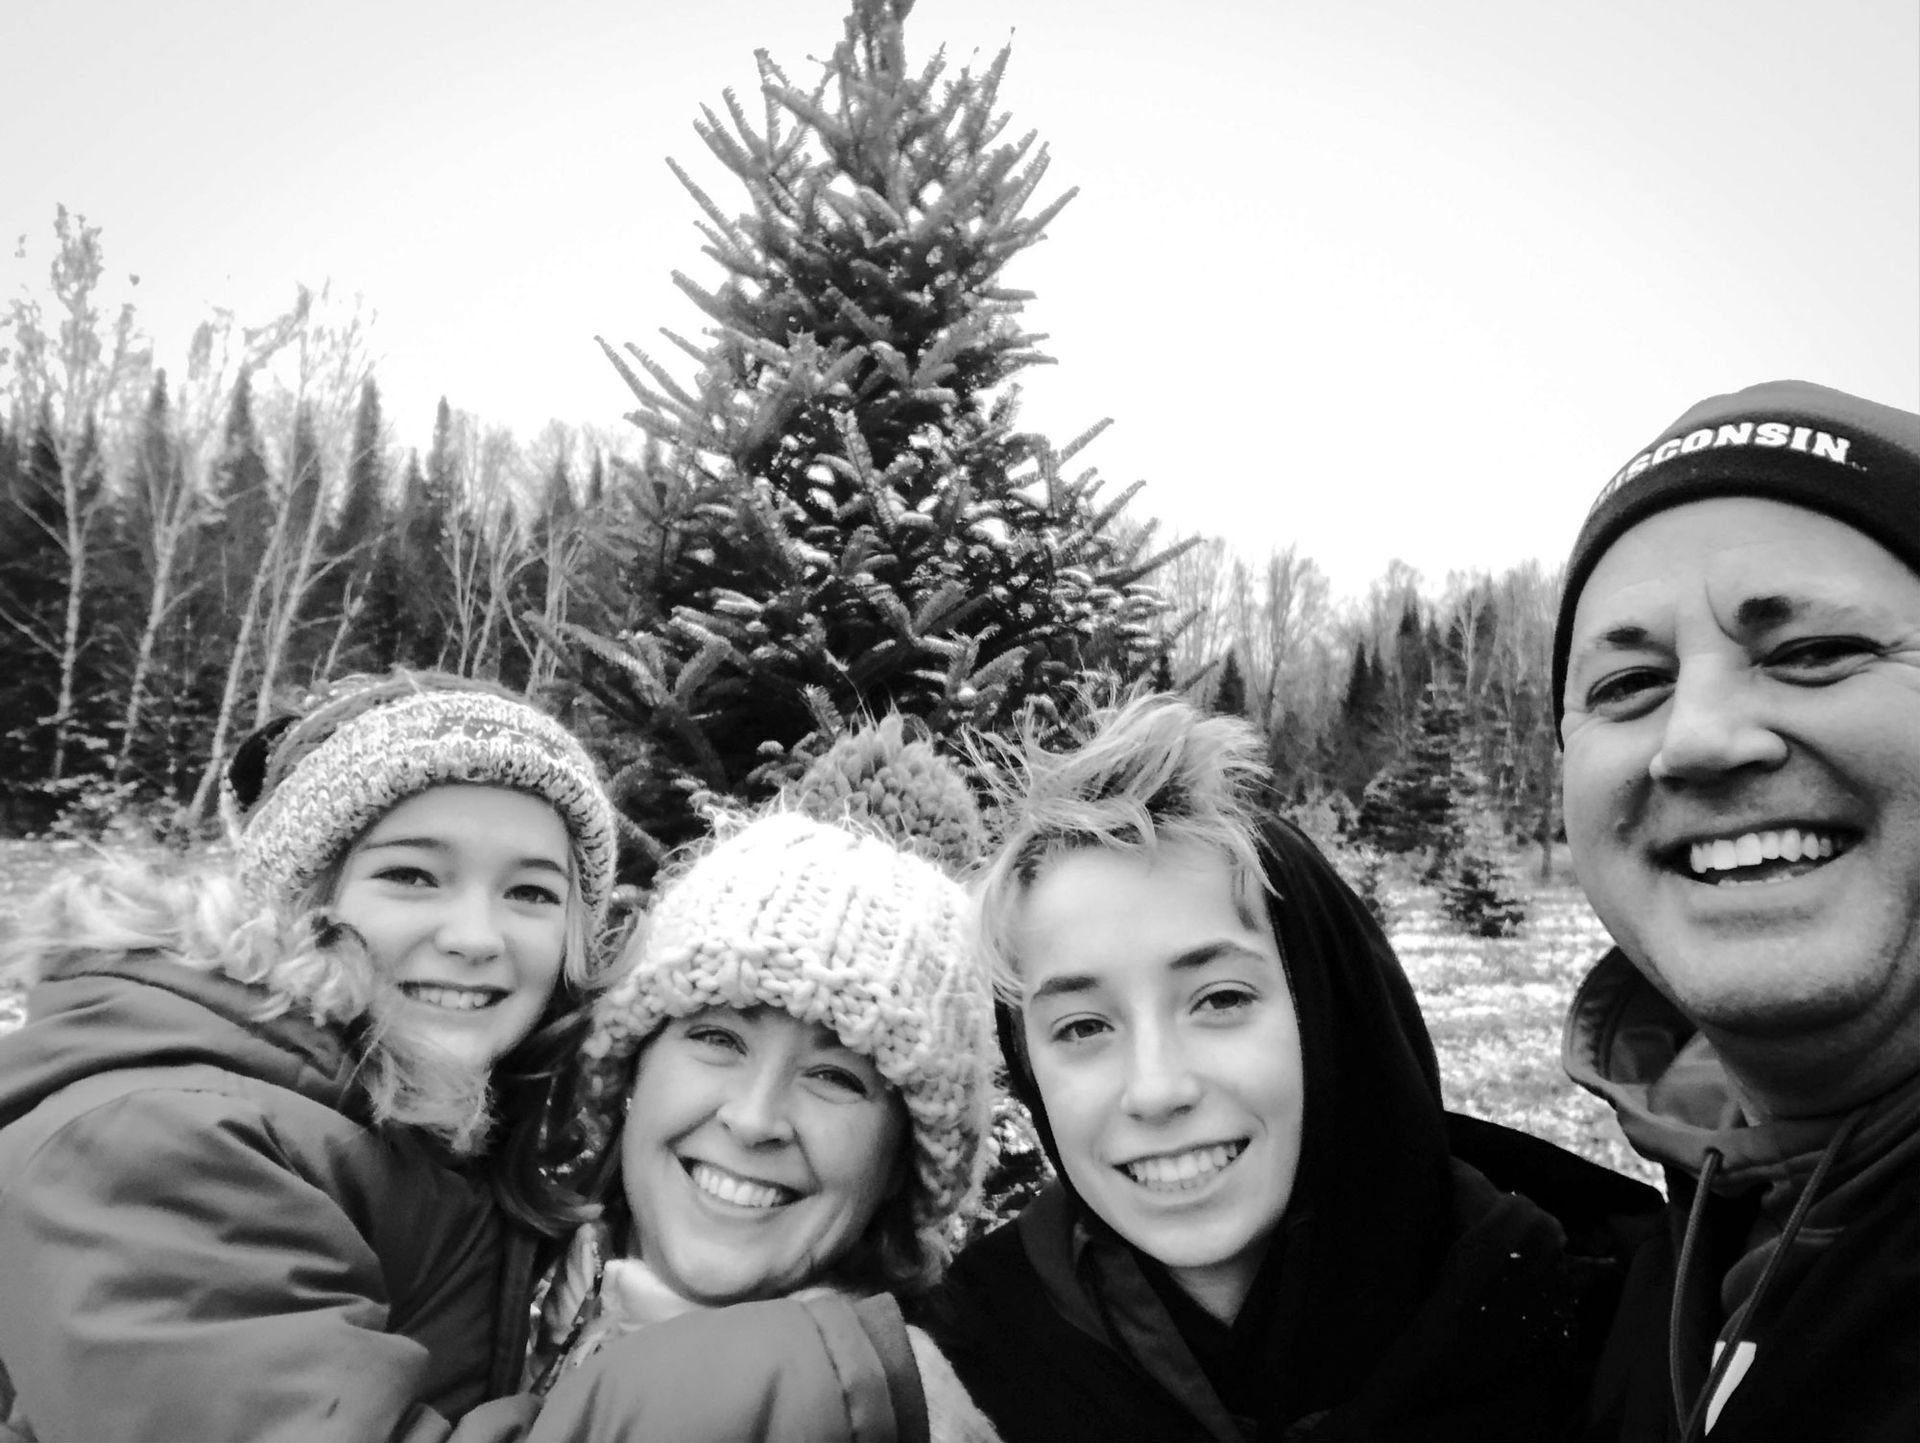 Black and white photo of Aaron with his wife and two children at a Christmas tree farm